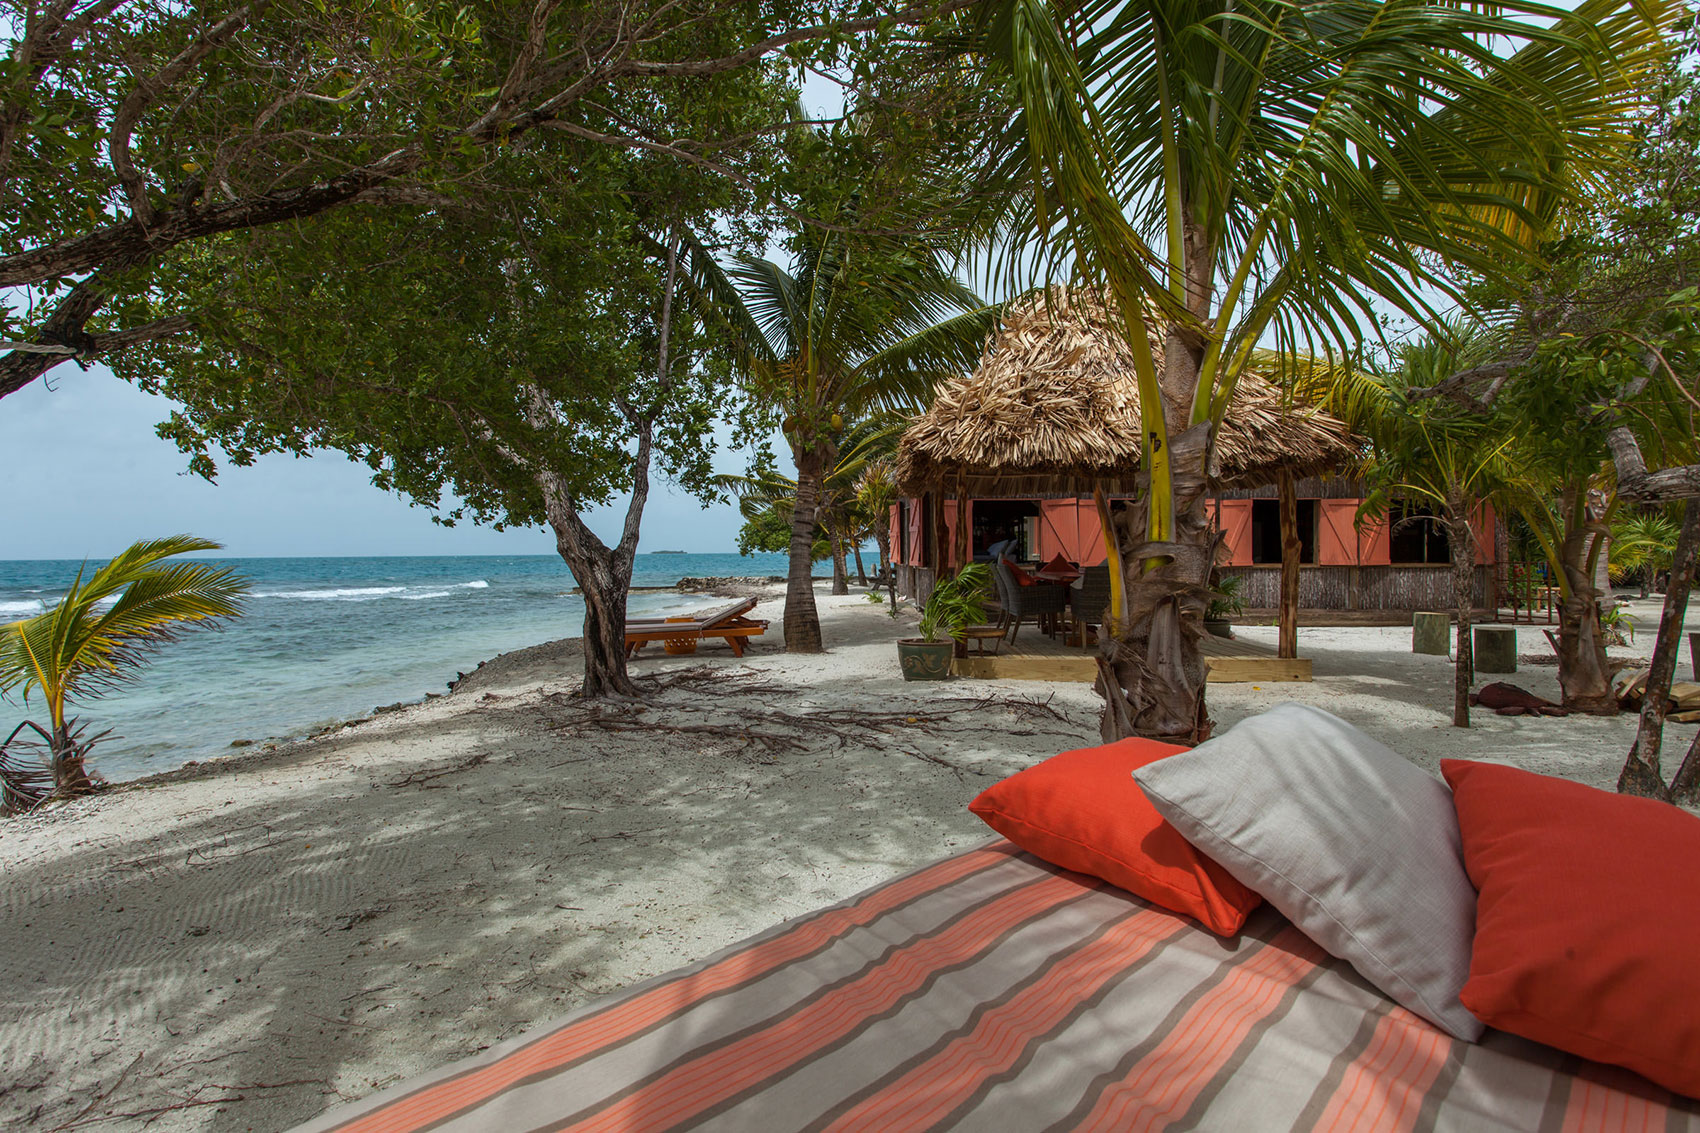 Bed on a beach in Belize